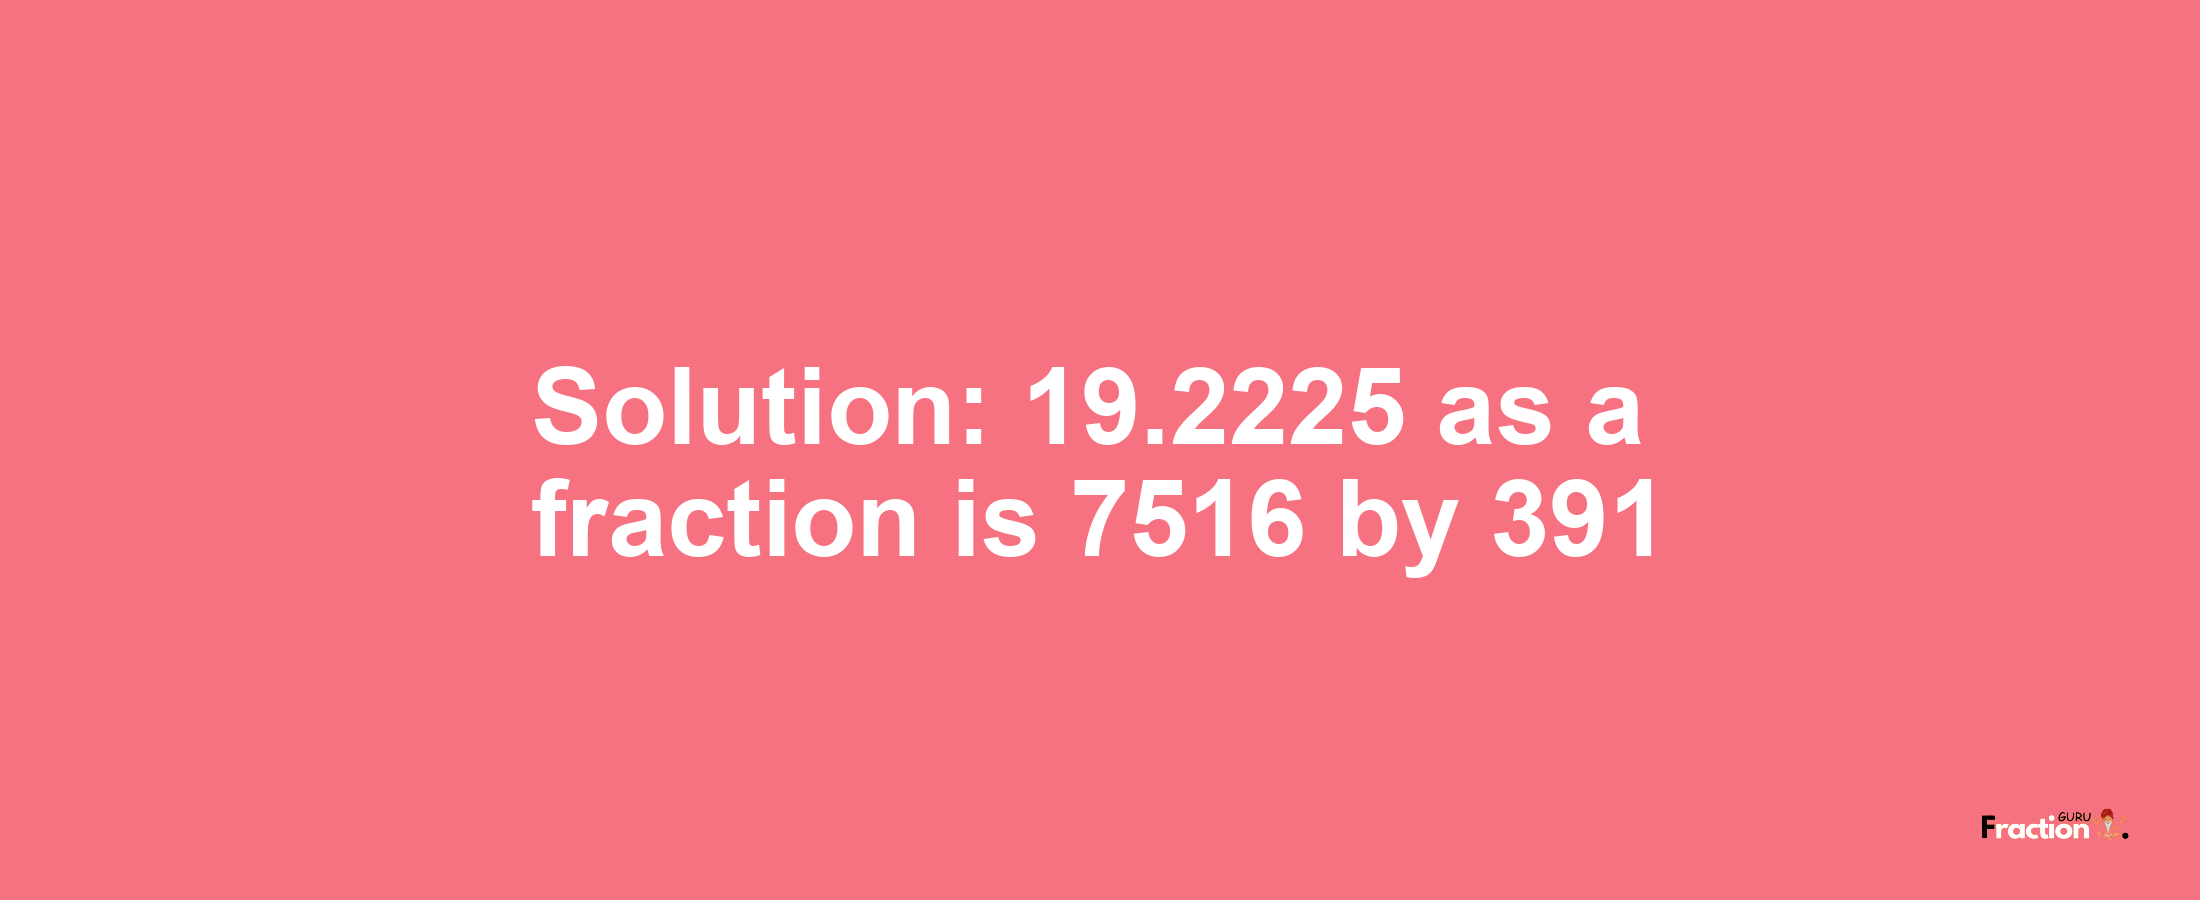 Solution:19.2225 as a fraction is 7516/391